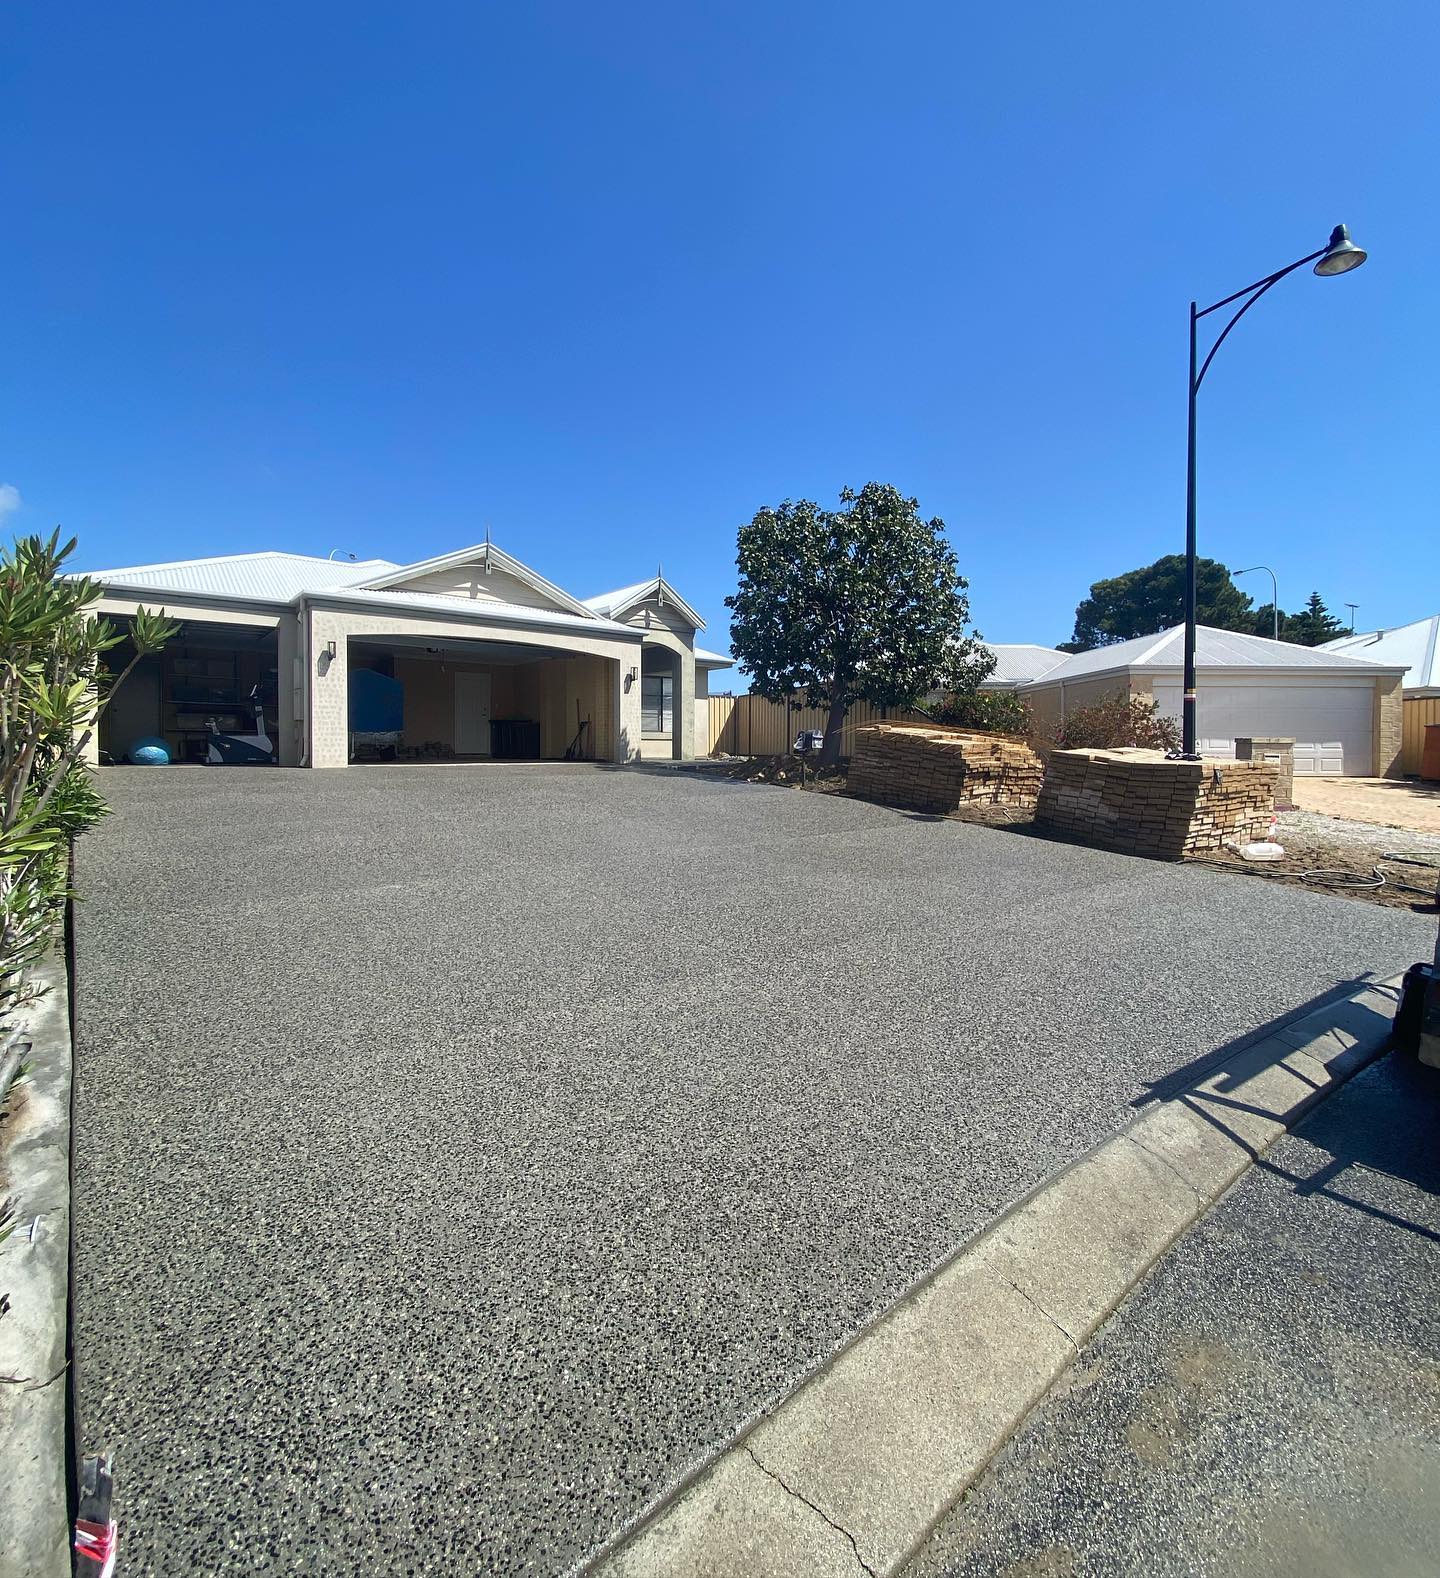 View Photo: Three Car Wide Driveway with Exposed Aggregate Concrete Finish